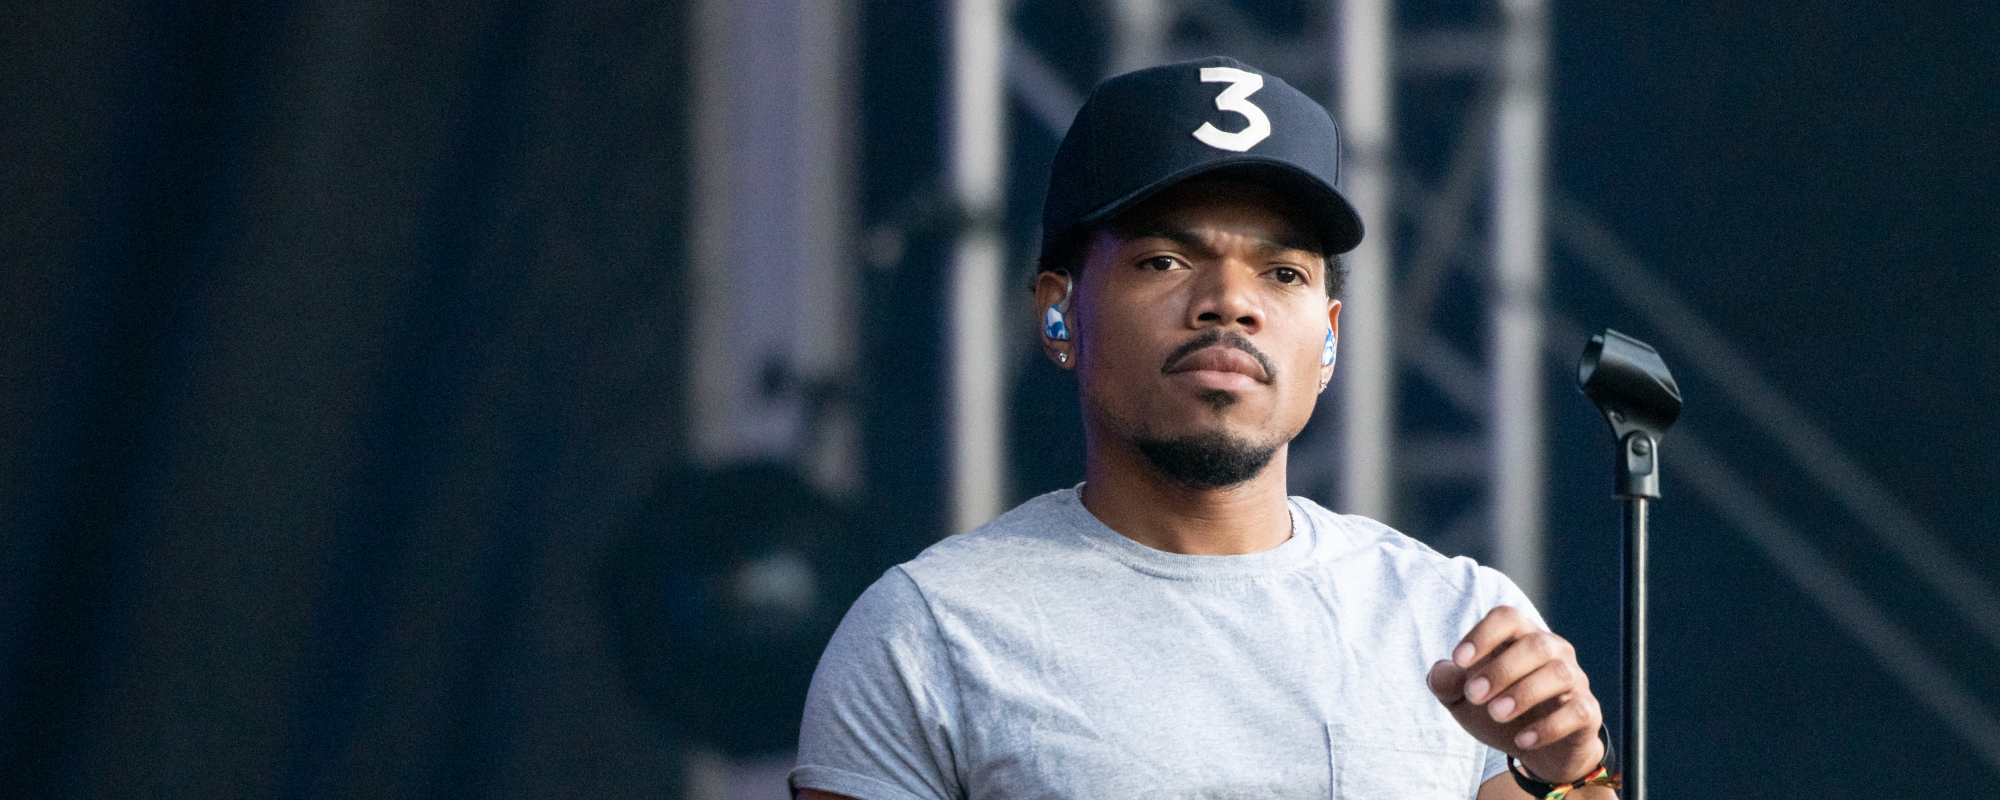 Chance The Rapper Opens Up About Drug Use: “I Would Have Died for Sure”